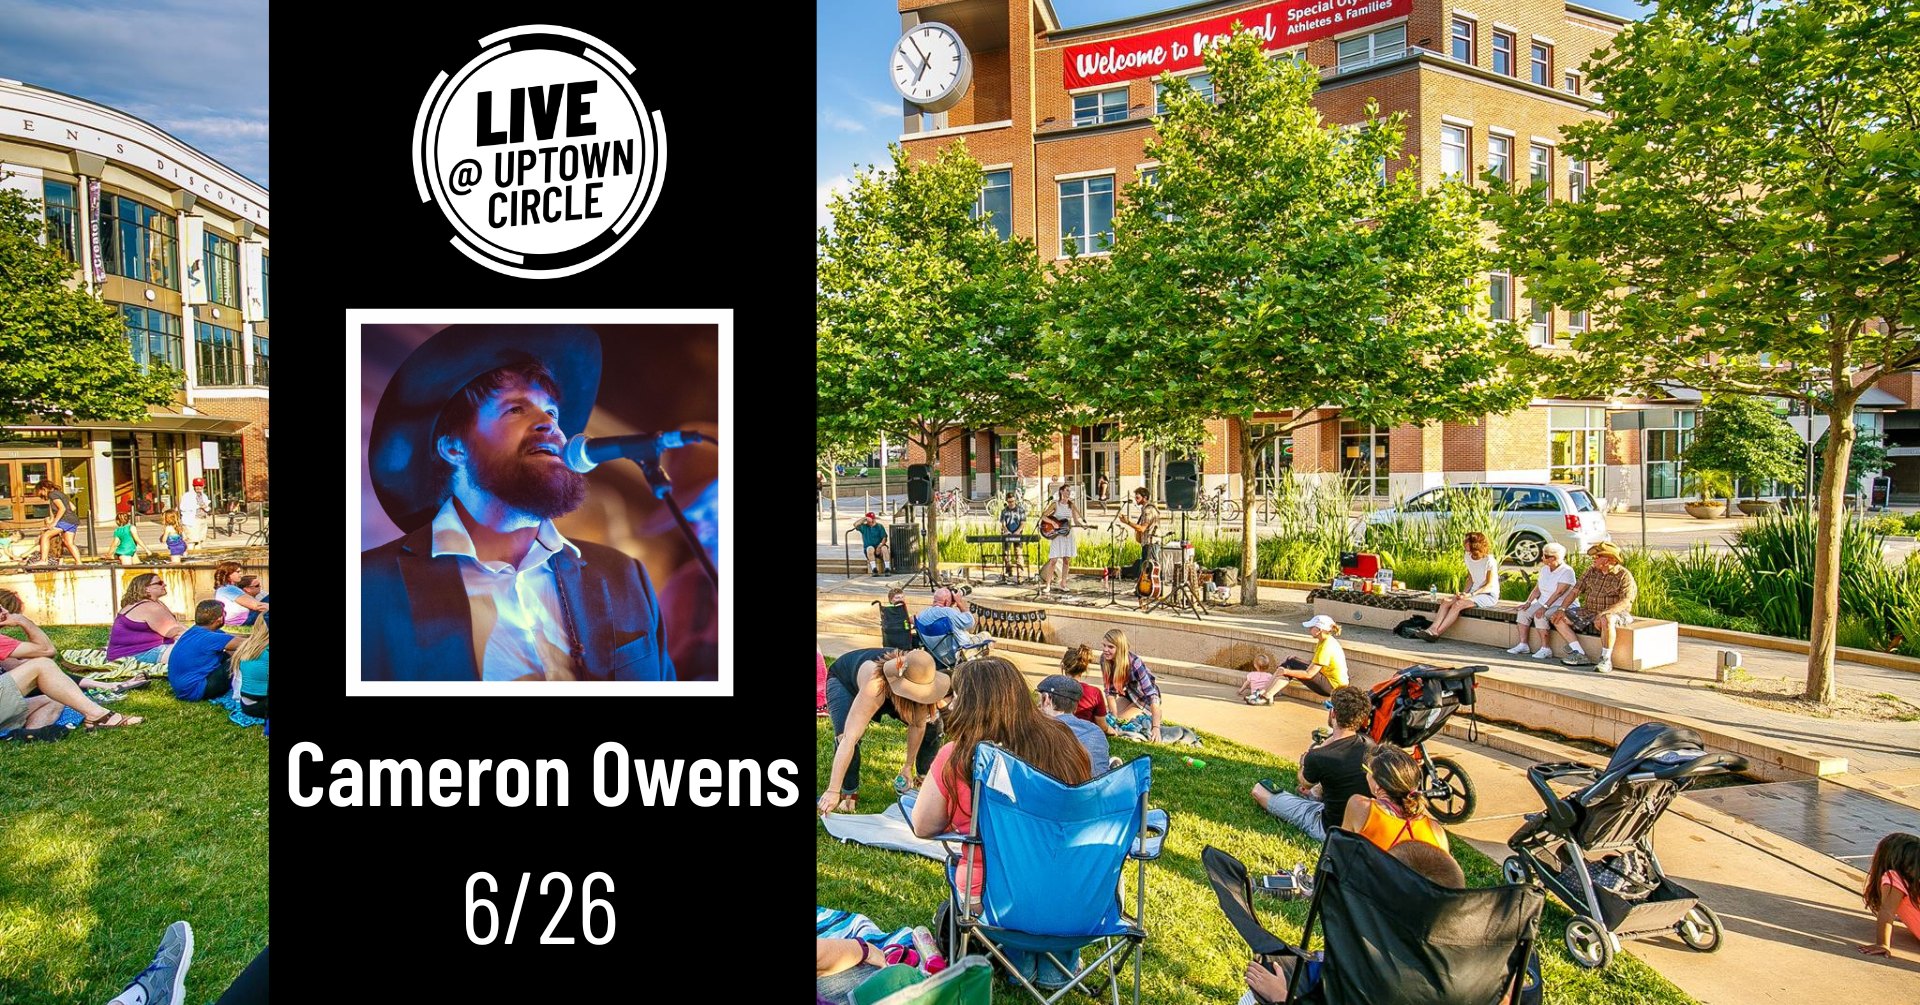 Normal LIVE presents Cameron Owens @ Uptown Circle